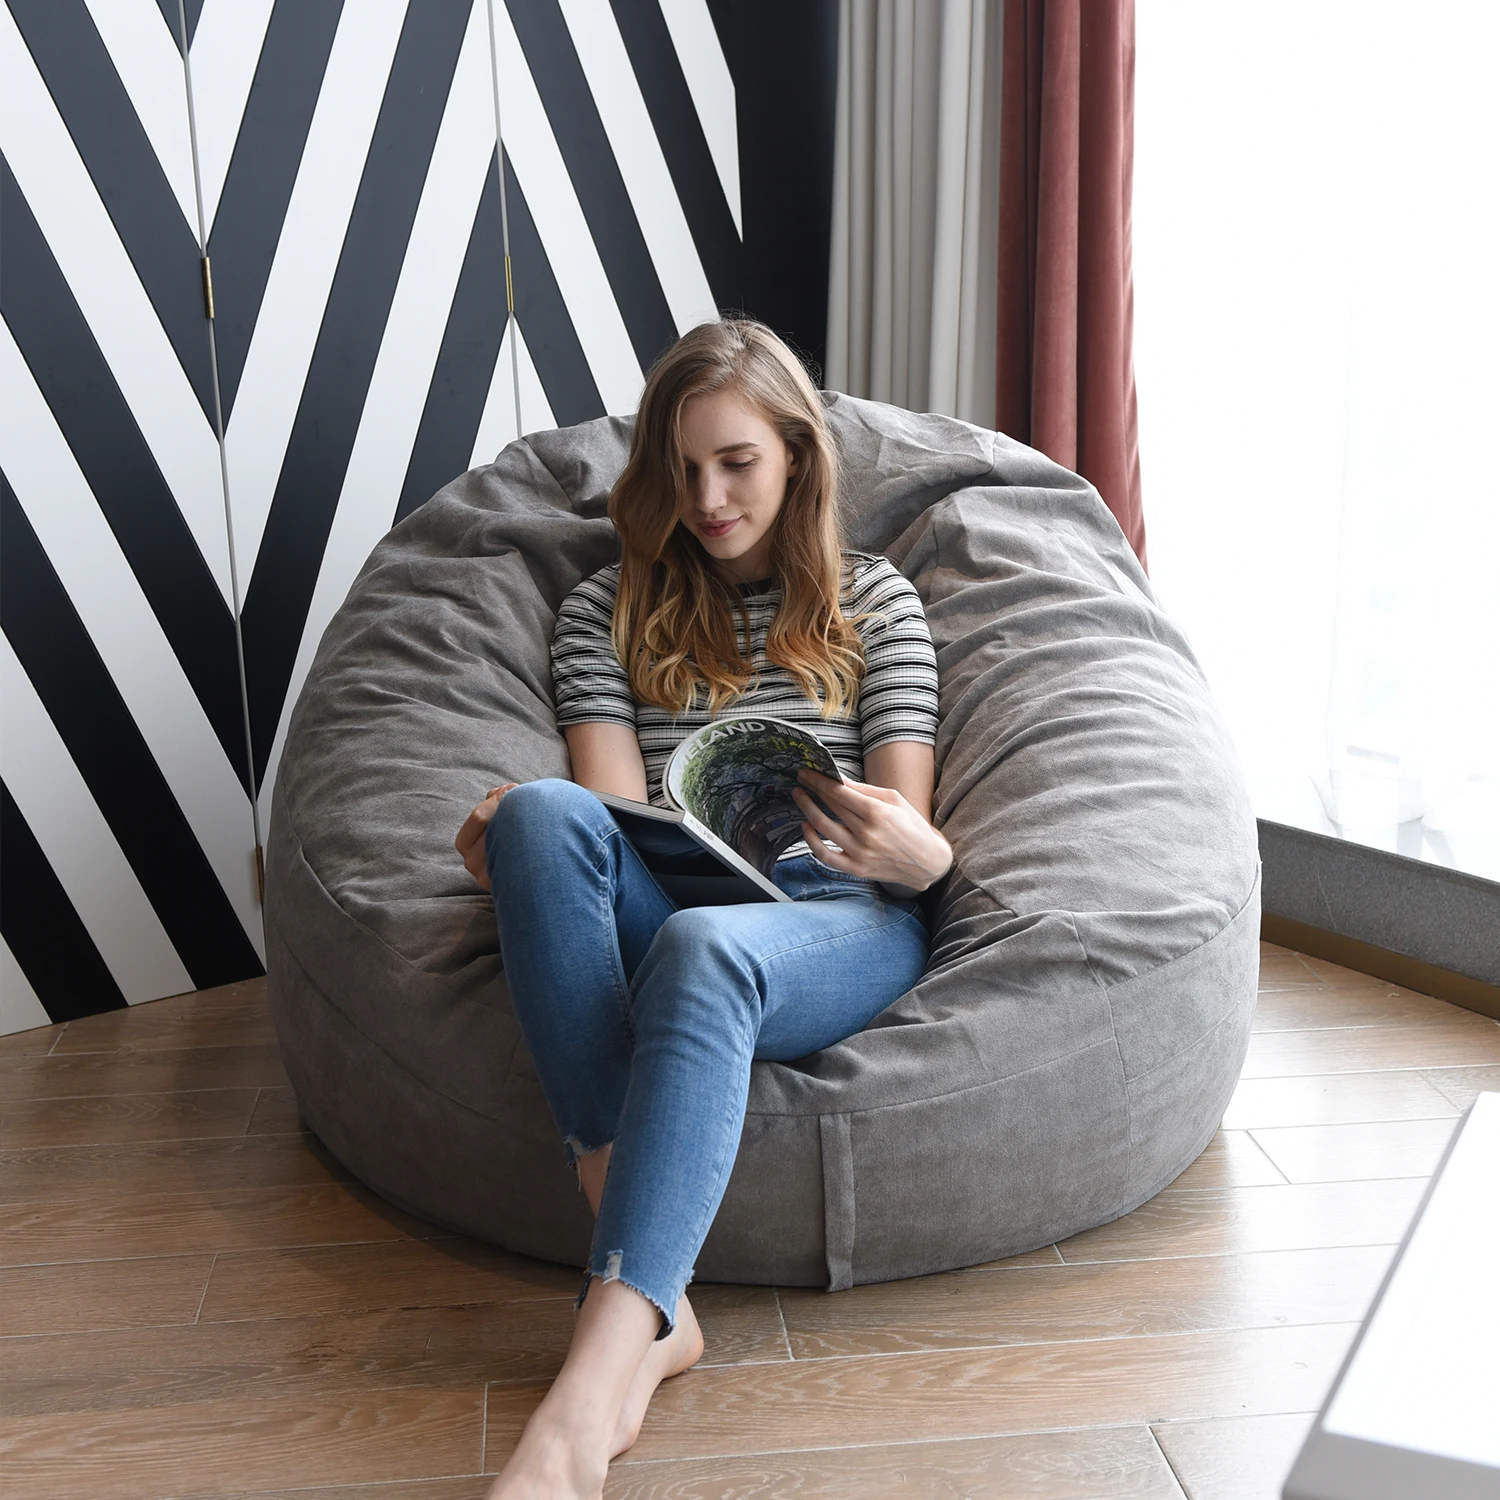 YJ Giant Bean Bag Chair Cover (No Filler) Living Room Sofa Washable Soft Sturdy Zipper Beanbag Cover for Teens/Adults